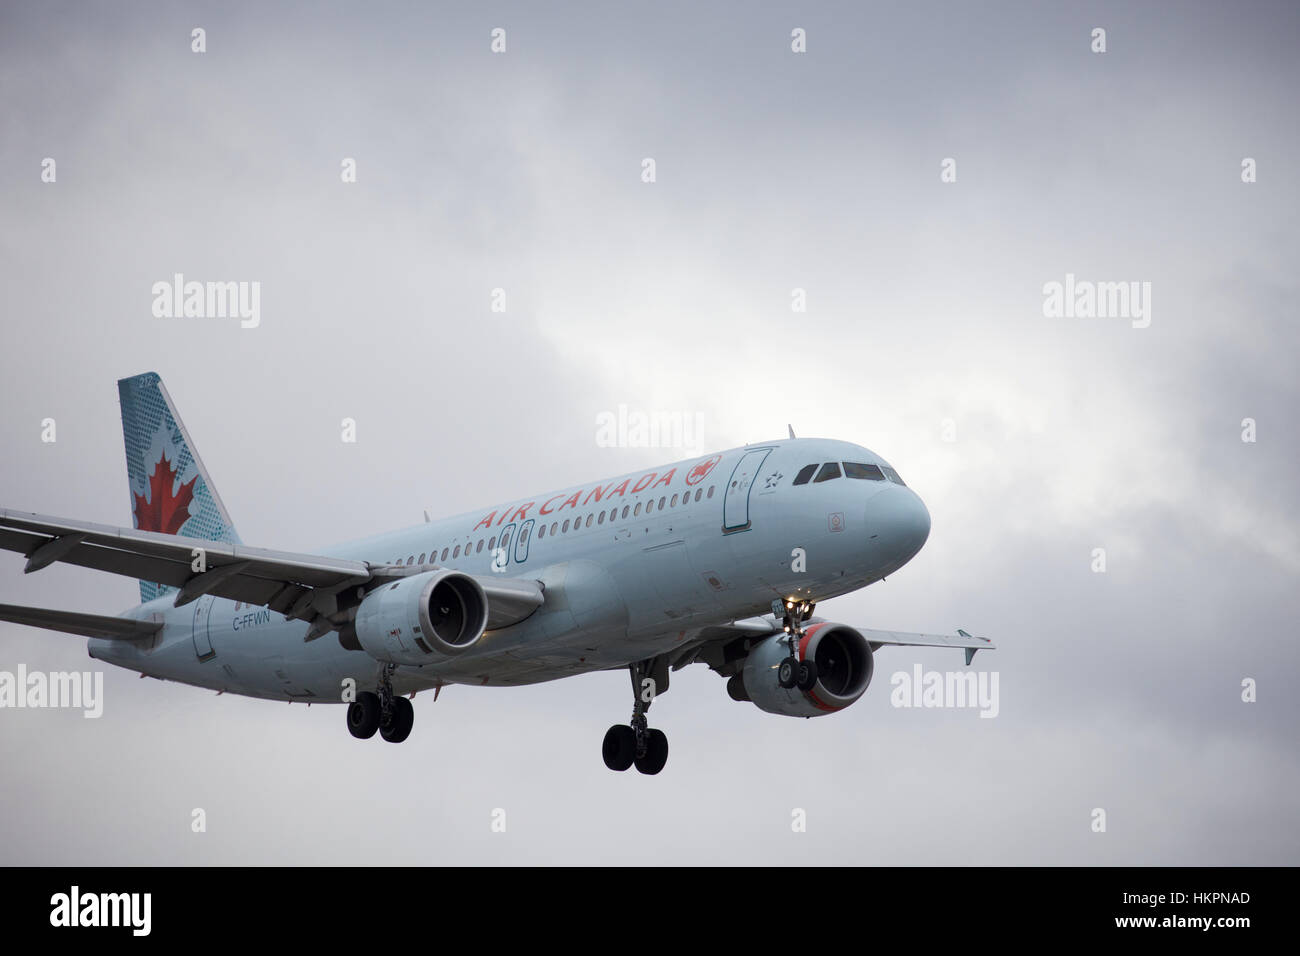 Air Canada Airbus 320 with Red Engine nacelle  Landing at Toronto Pearson Airport on Runway 23L Stock Photo